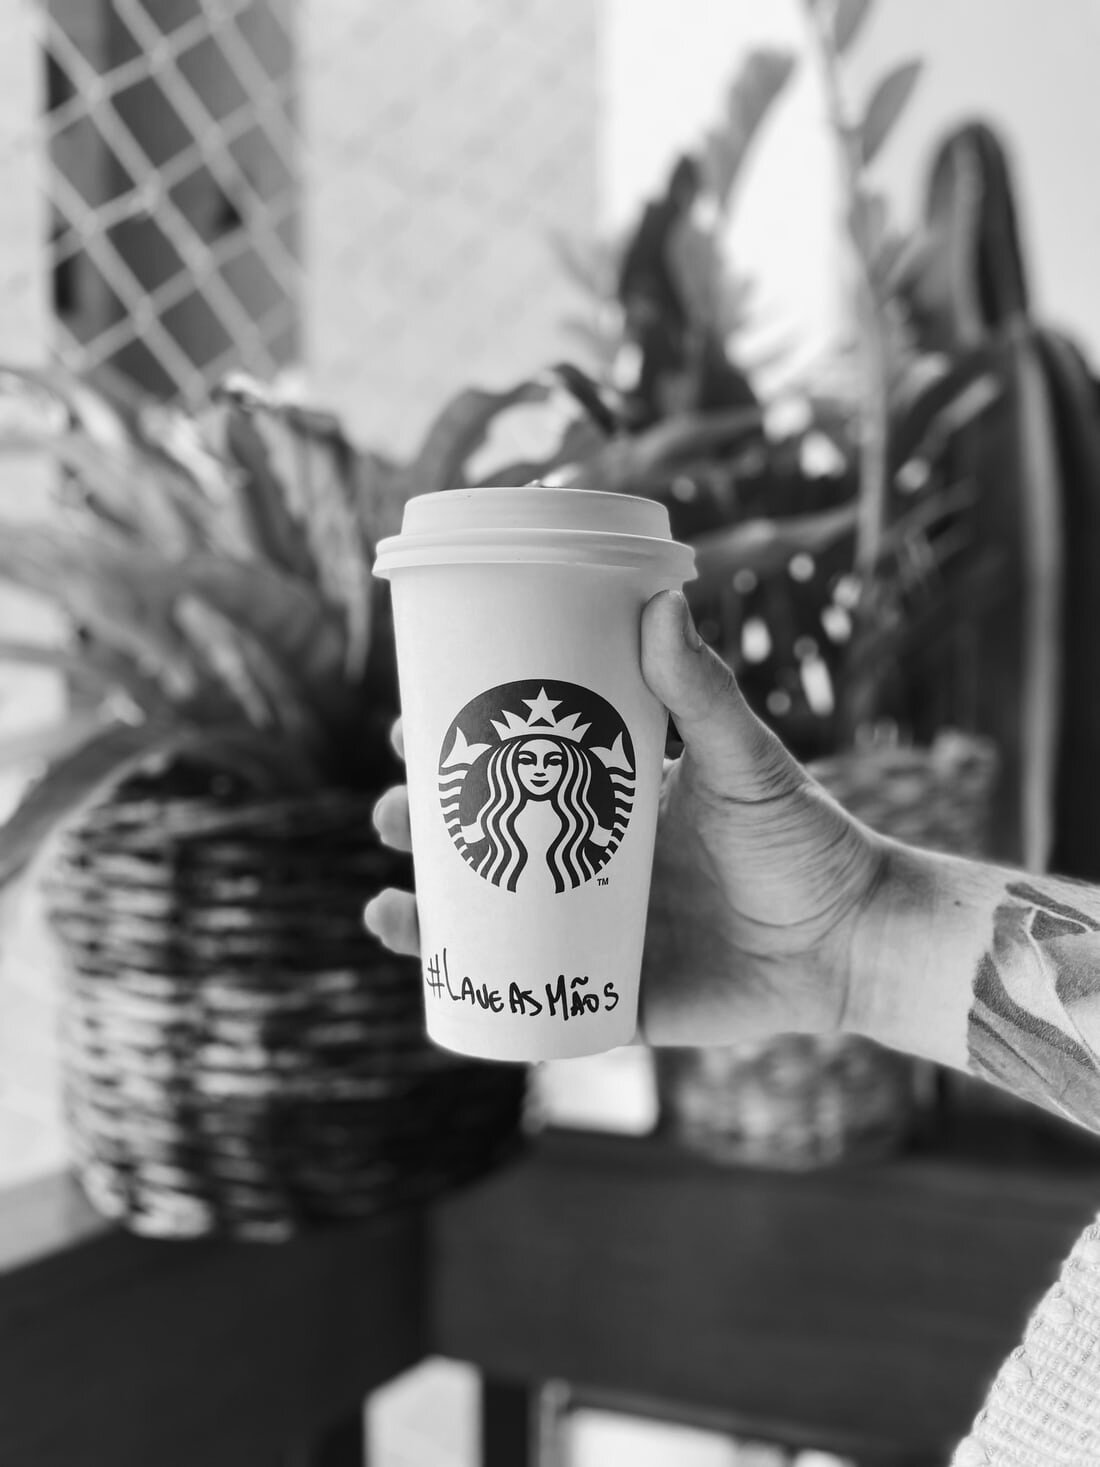 A hand holds up a white Starbucks cup with “LAVE AS MAOS” written on it. Via Unsplash.